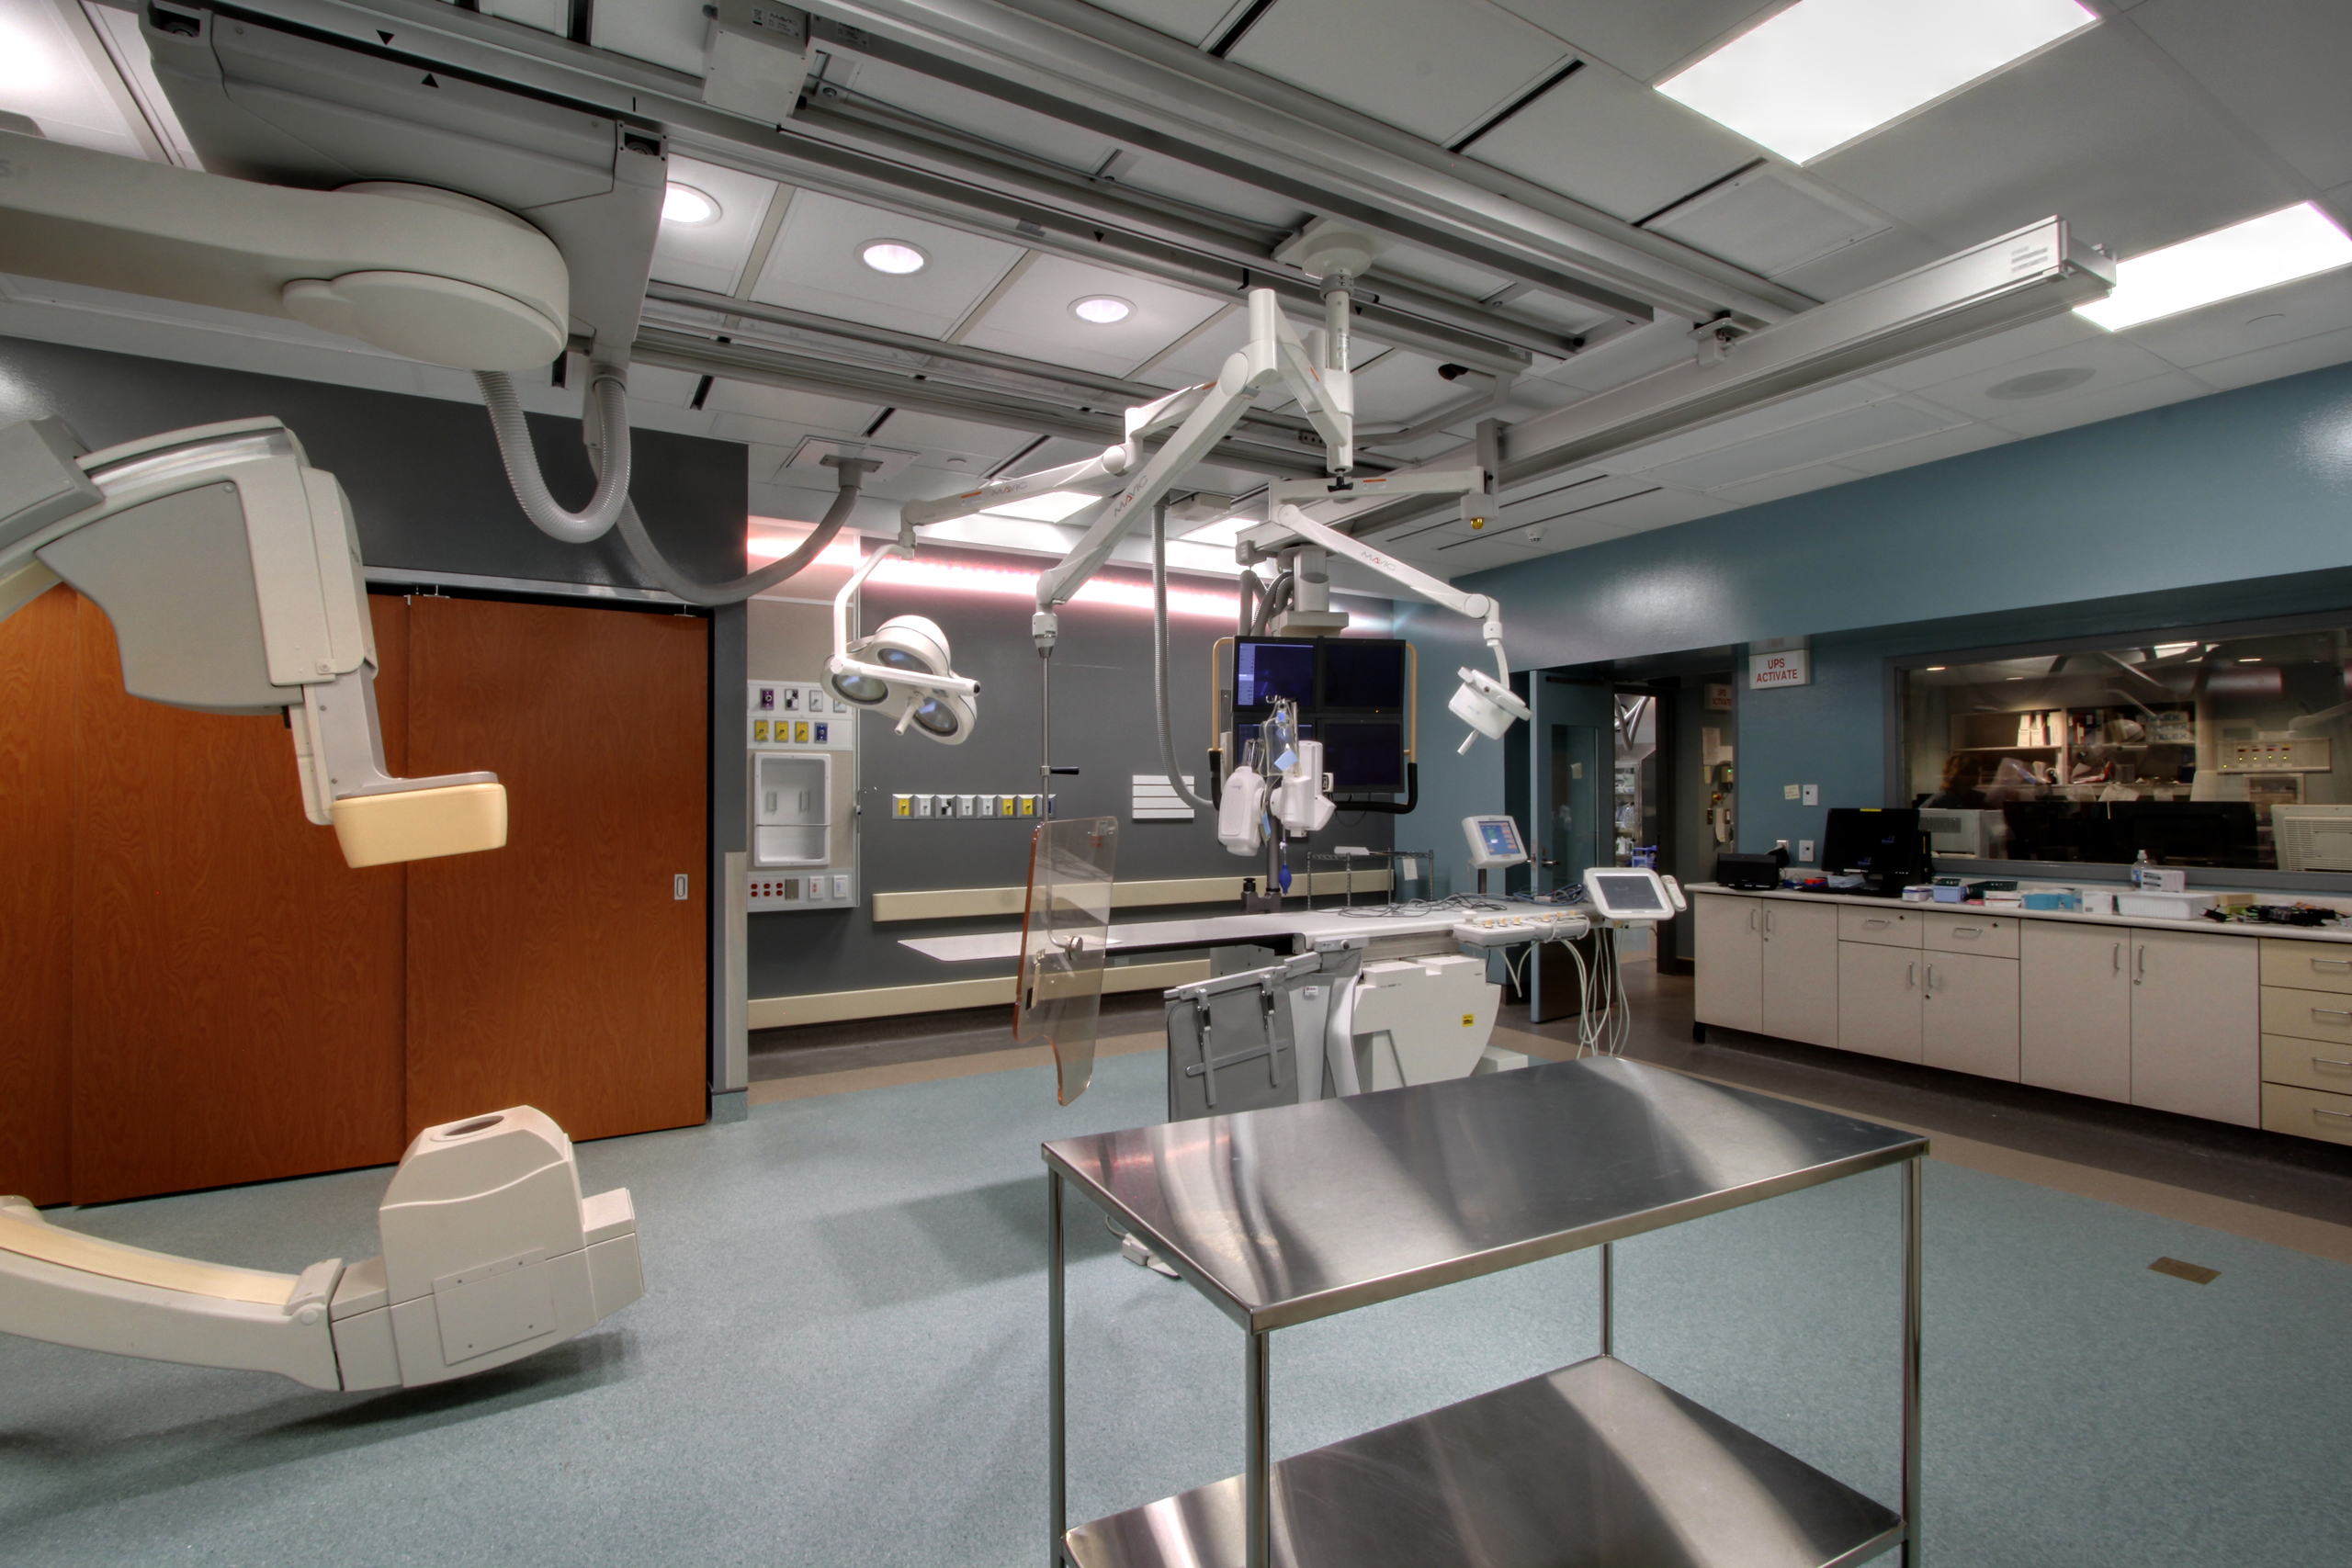 Thunder Bay Regional Health Sciences Centre Angioplasty Suite Addition and Renovation